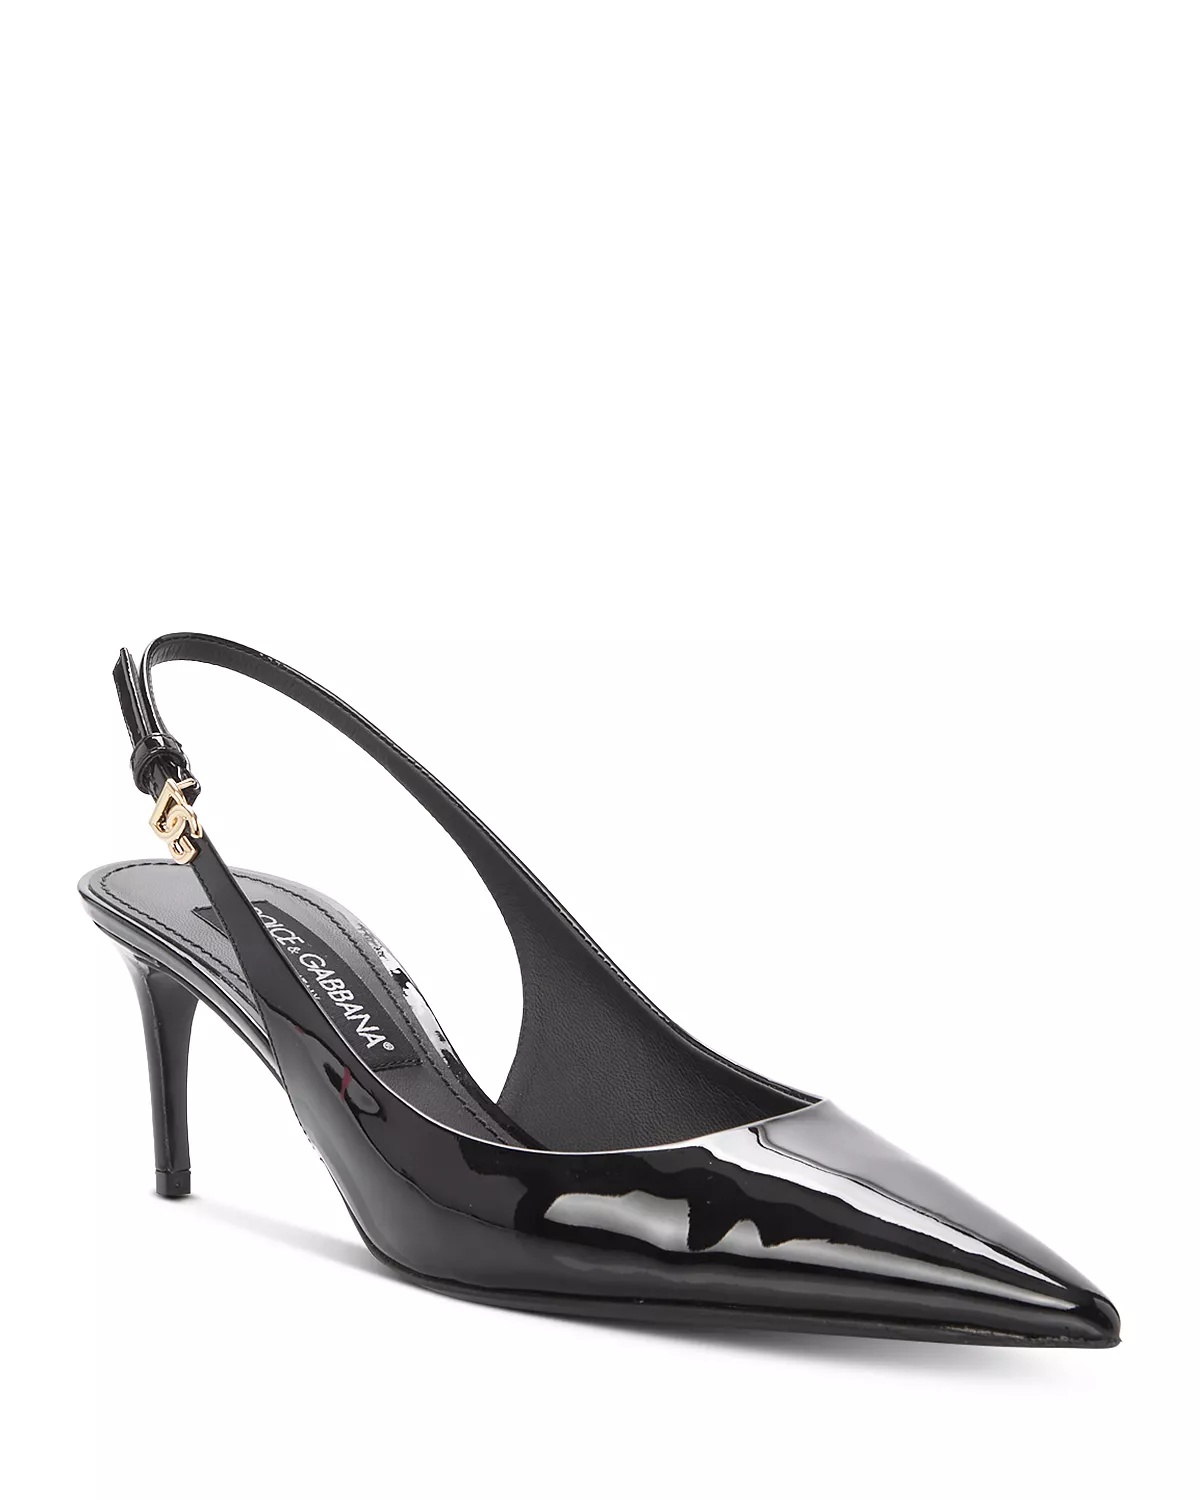 Women's Glossy Pointed Toe Slingback Pumps - 1